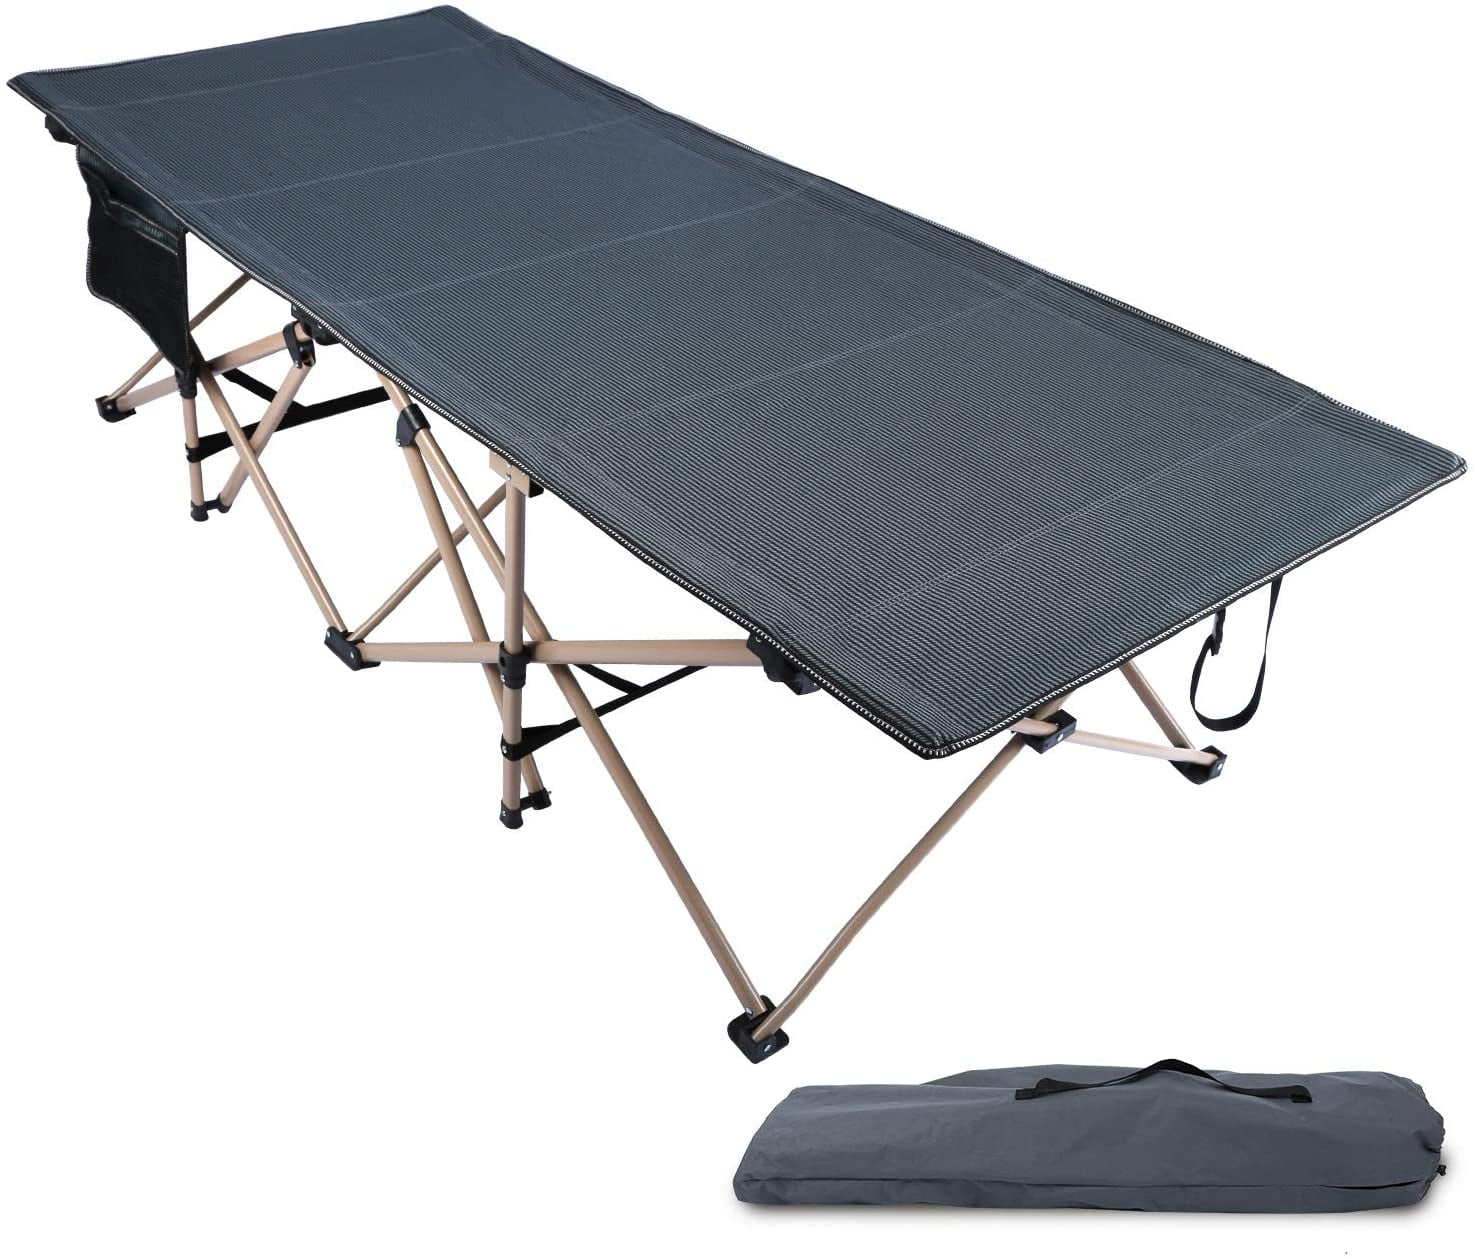 28-33 Extra Wide Sturdy Portable Sleeping Cot for Camp Office Use REDCAMP Folding Camping Cots for Adults Heavy Duty Blue Gray 